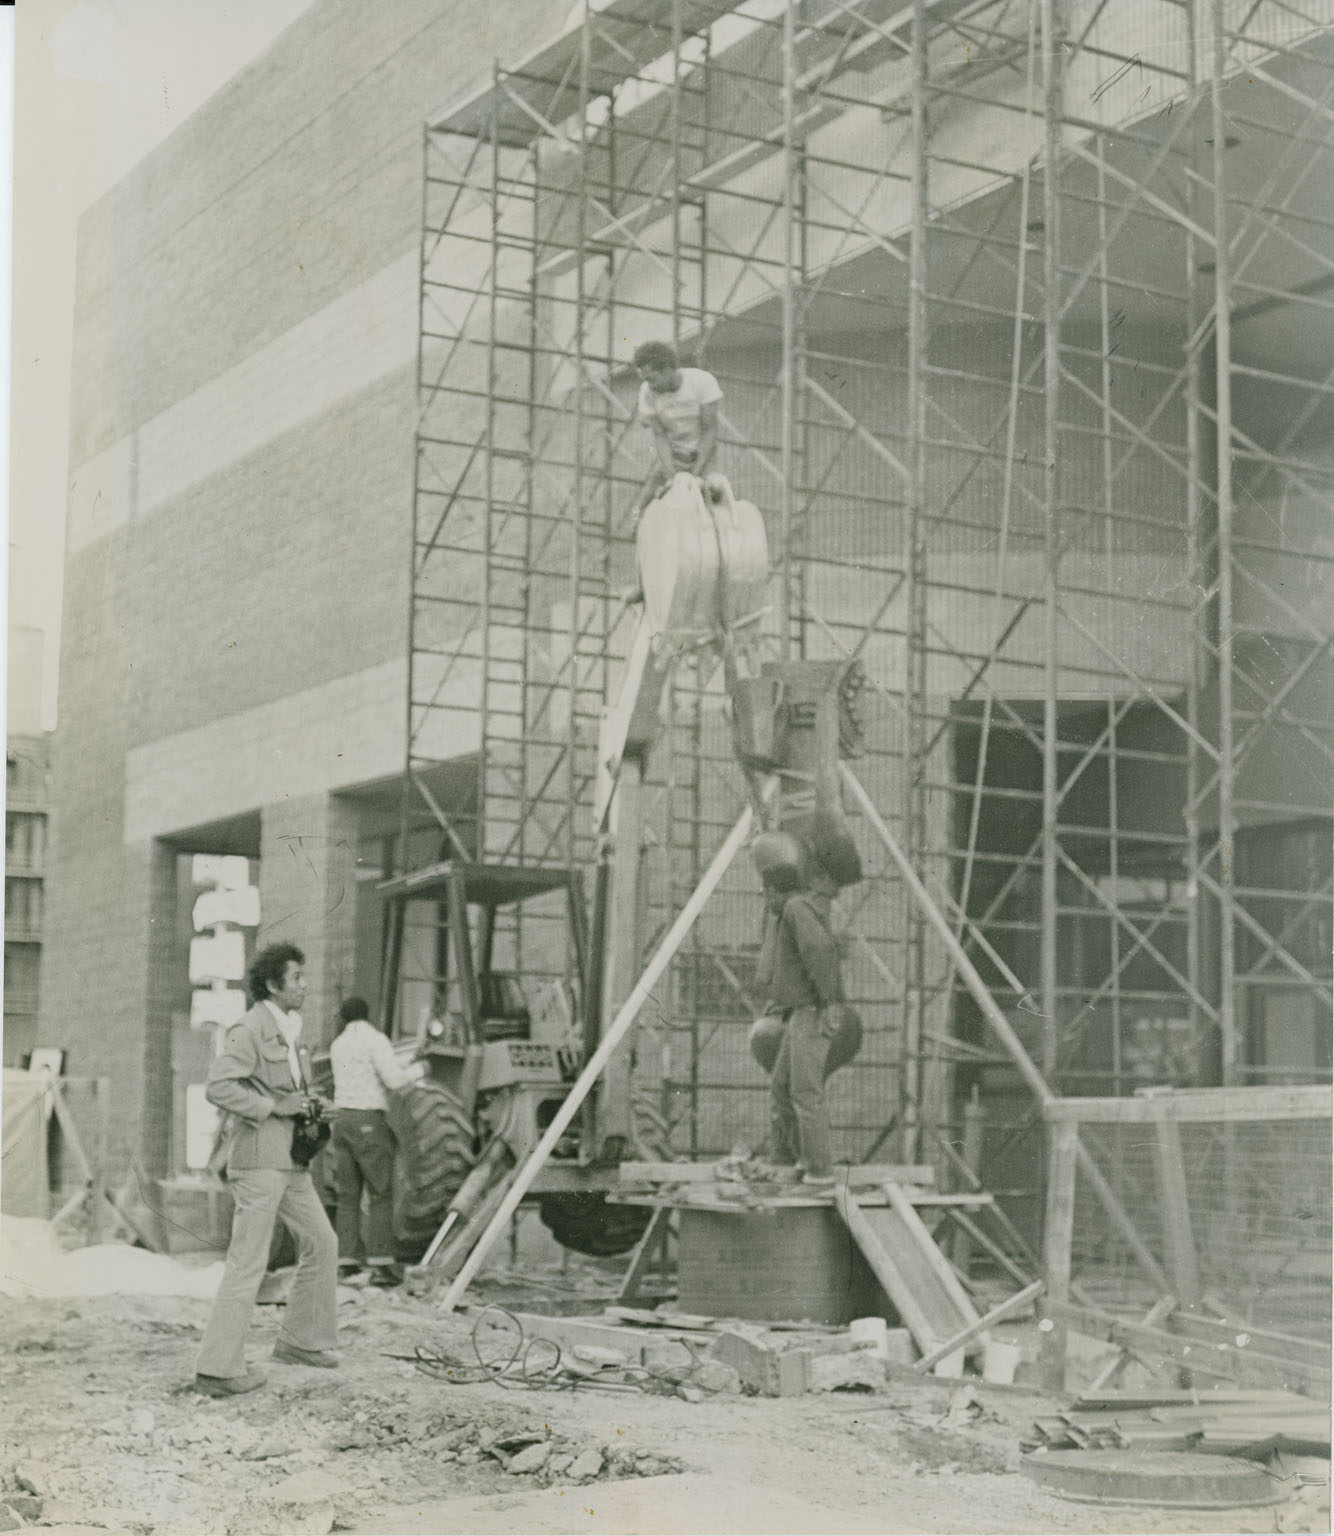 Black and white photo of people installing an outdoor sculpture.